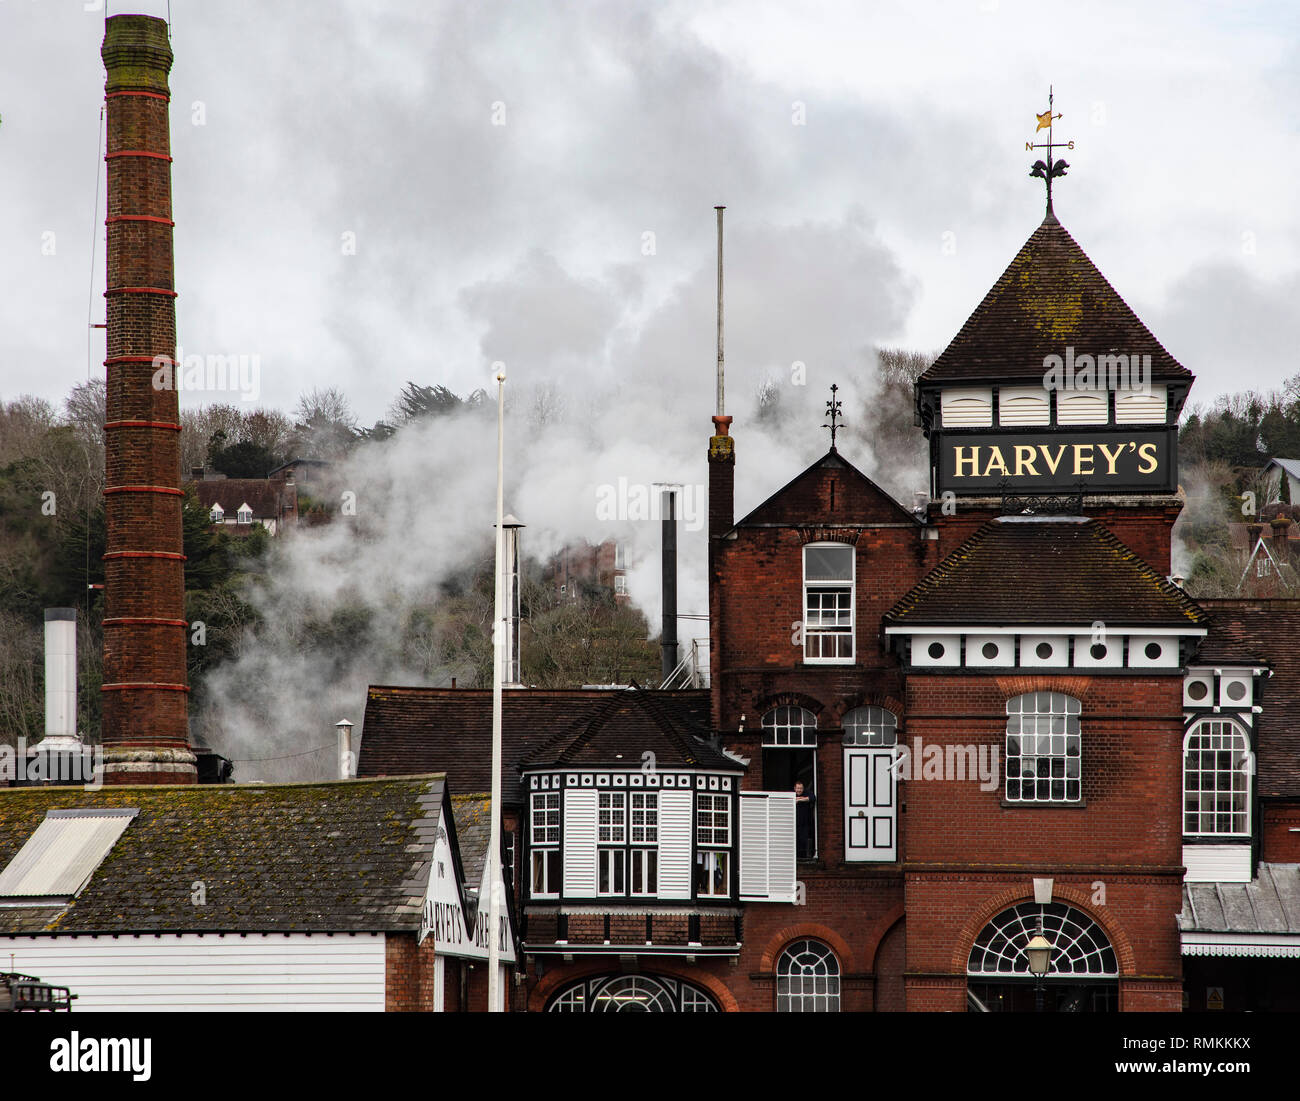 Harvey's Brewery Lewes with steam coming out on a busy day Stock Photo